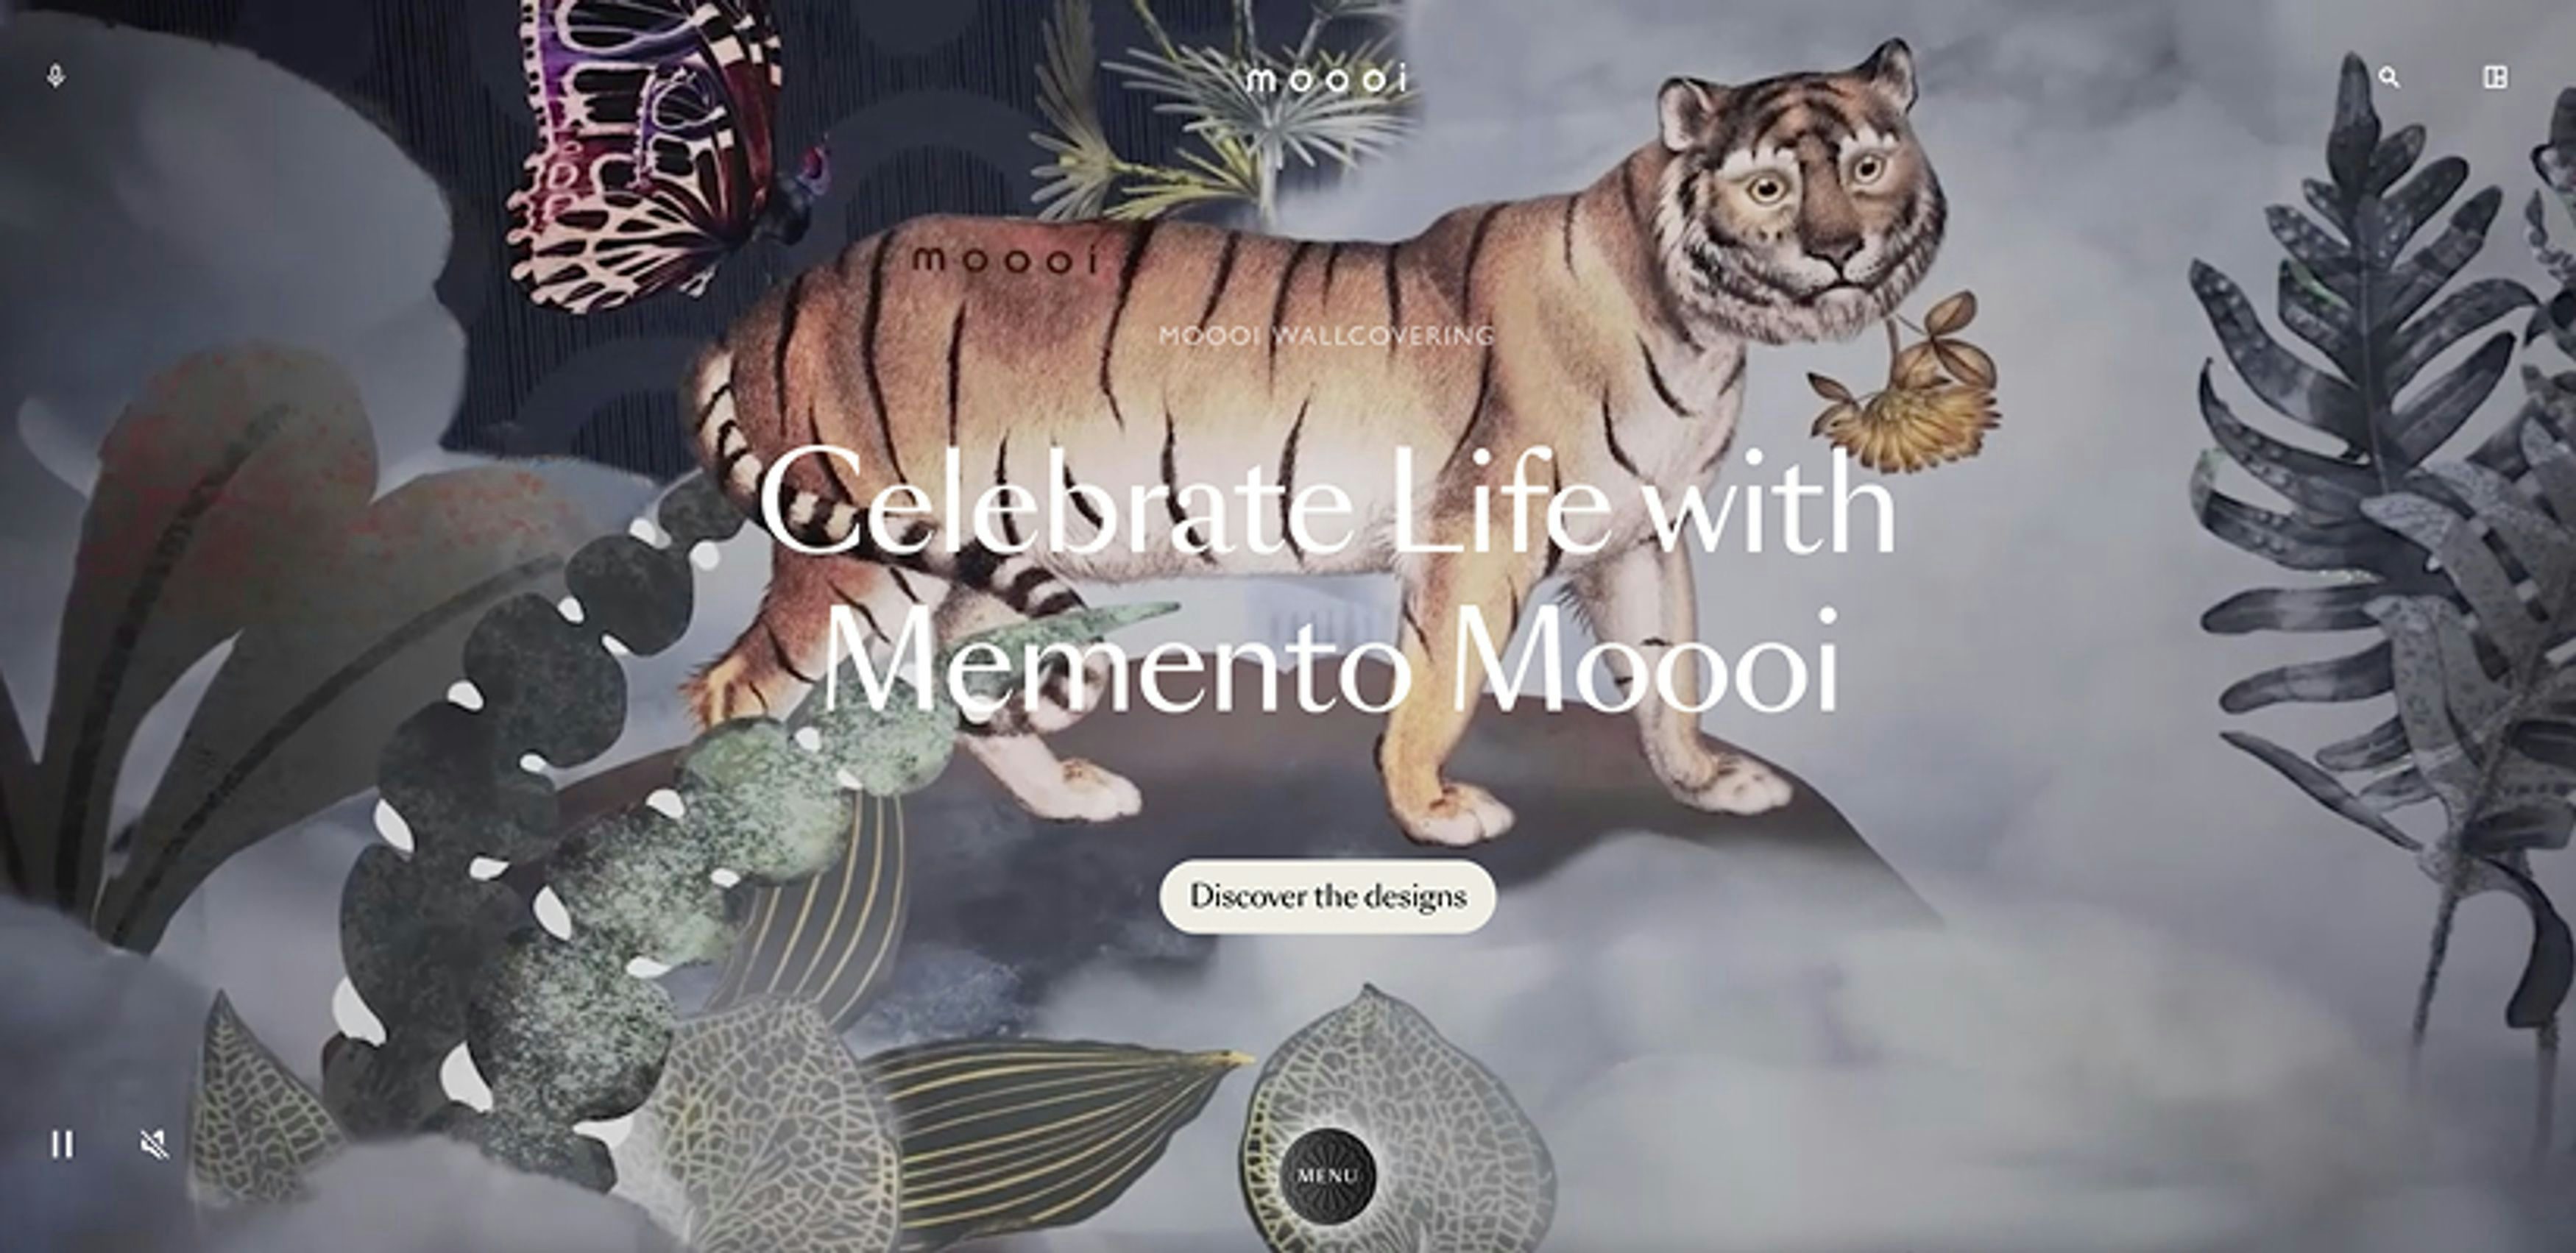 A promotional banner for Moooi wall covering featuring a digitally rendered tiger in the centre with wings, surrounded by exotic foliage and butterflies, with the text 'Celebrate Life with Memento Moooi' and a call-to-action button that reads 'Discover the designs'.